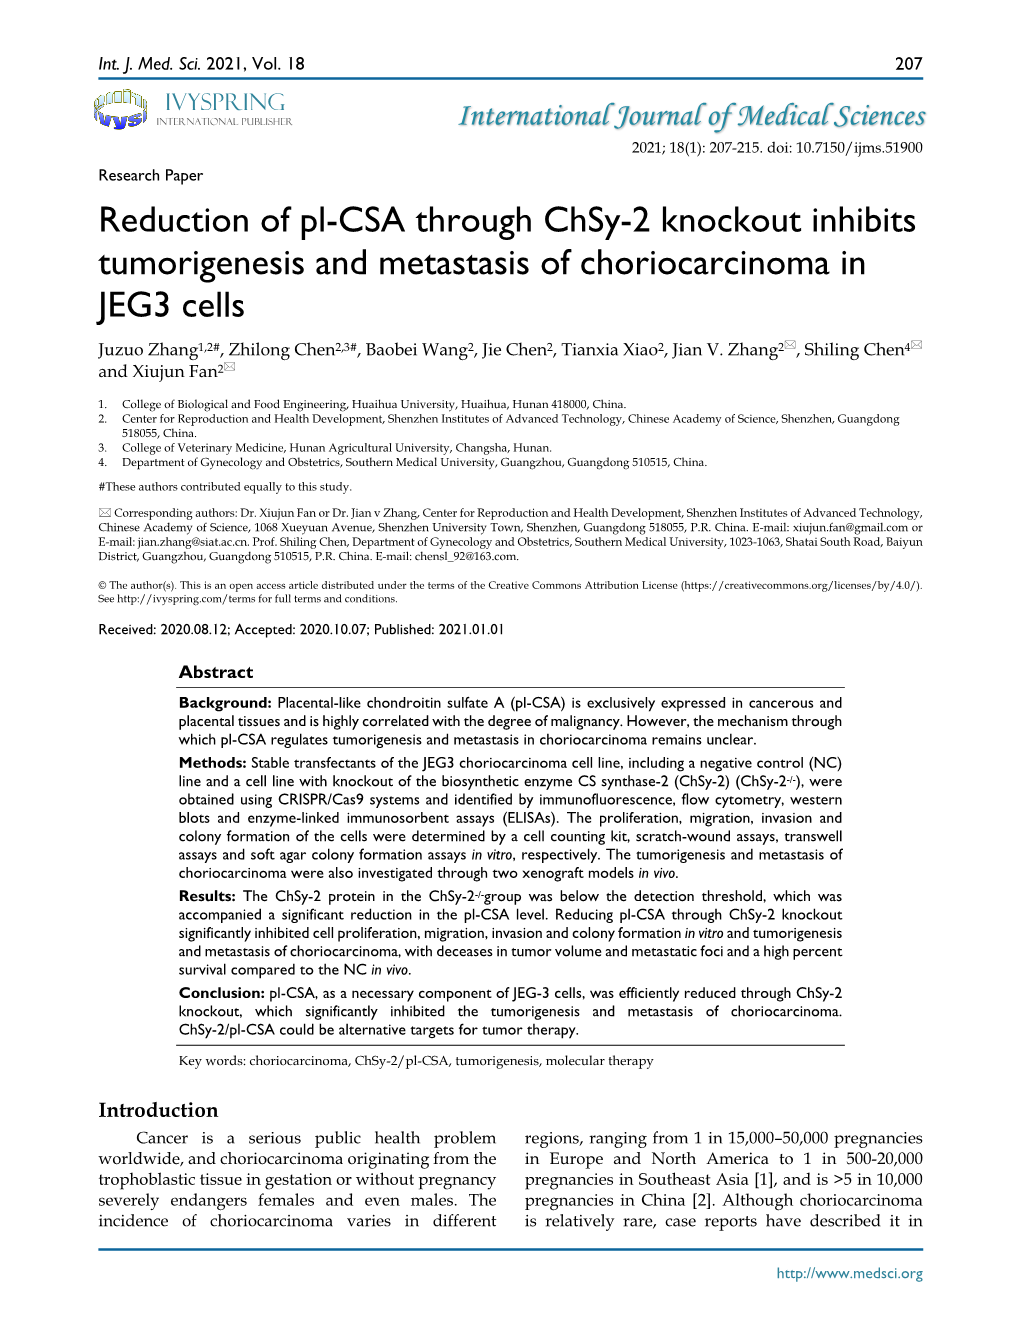 Reduction of Pl-CSA Through Chsy-2 Knockout Inhibits Tumorigenesis And